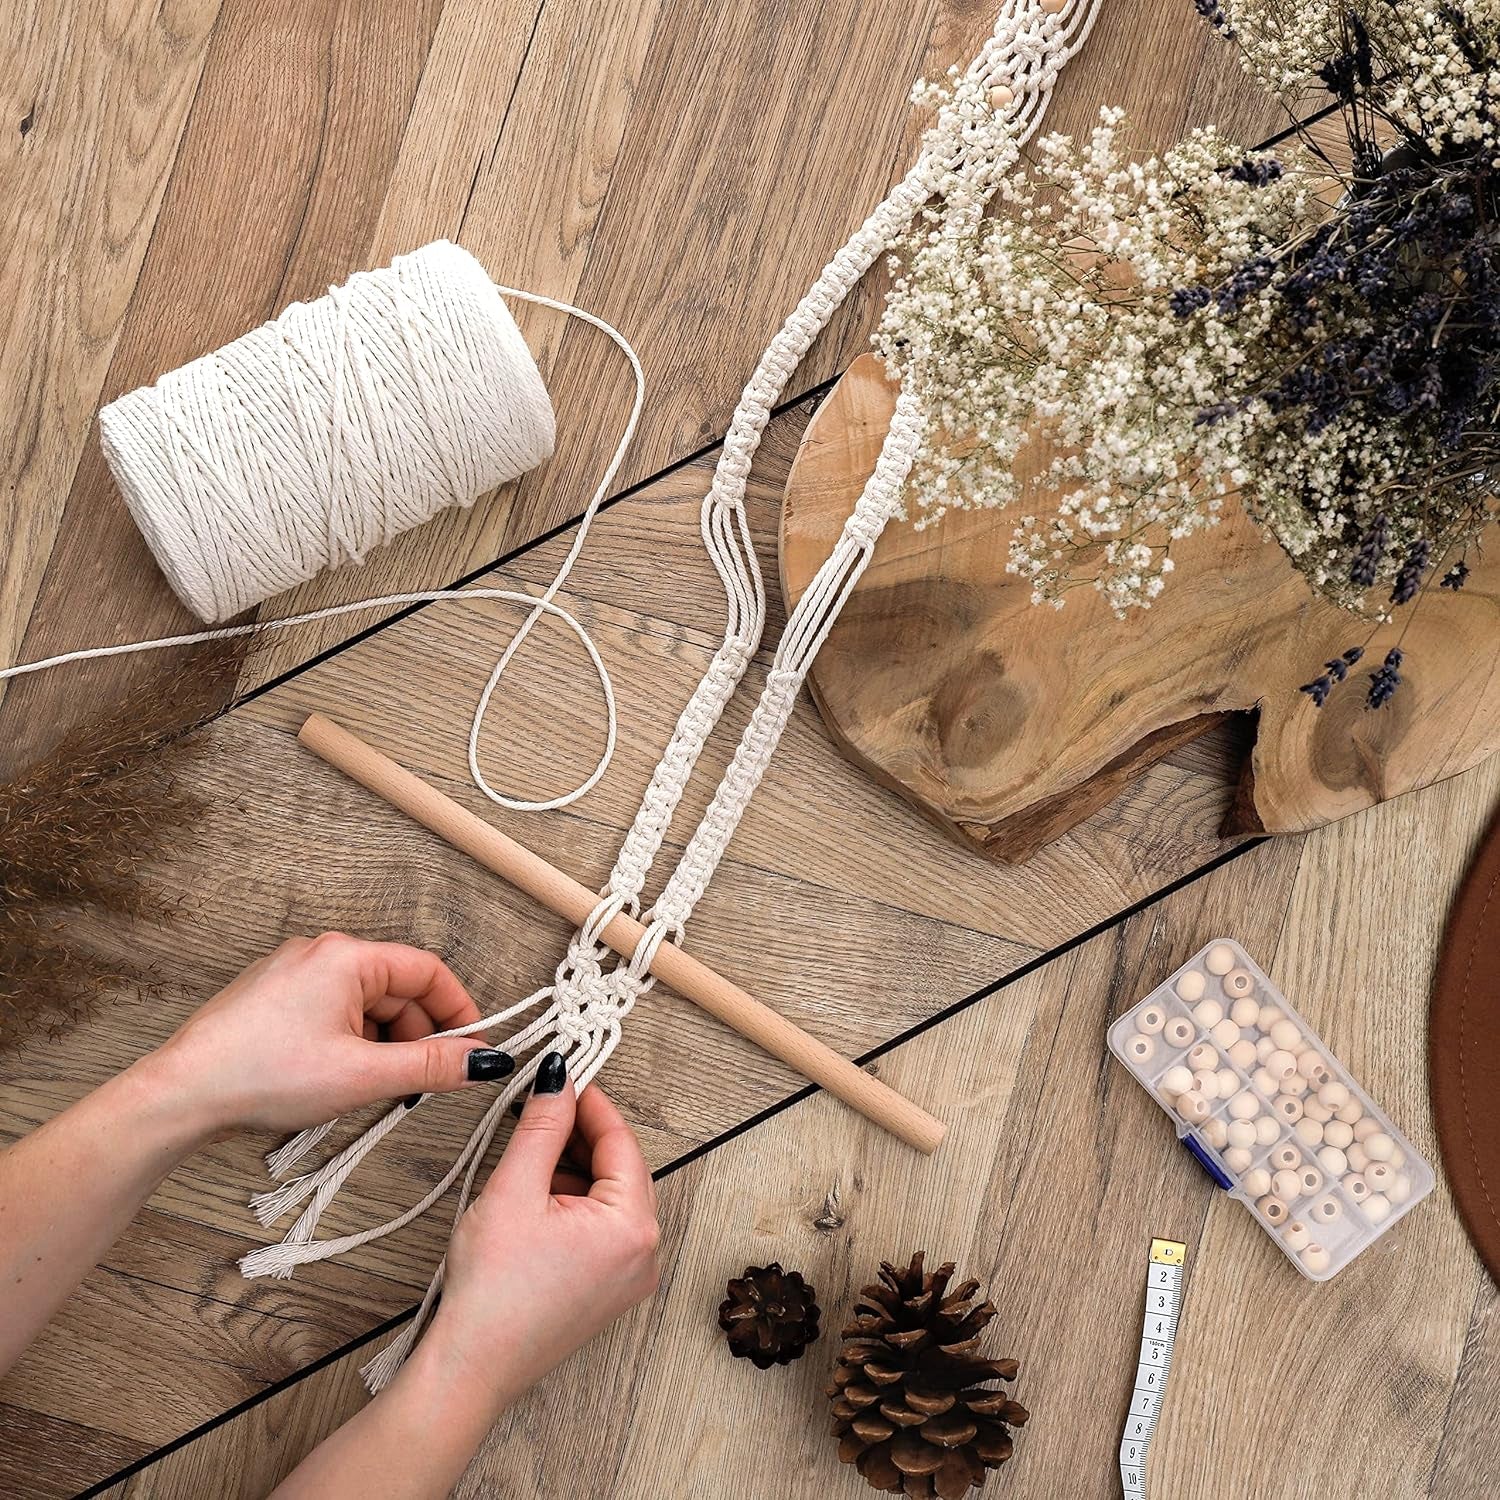 Macrame Kits for Adults Beginners: DIY Macrame Kit with 220 Yards Macrame Cord and 58Pcs Macrame Supplies. E-Book Tutorial for 5 Macrame Projects and Knots Included!